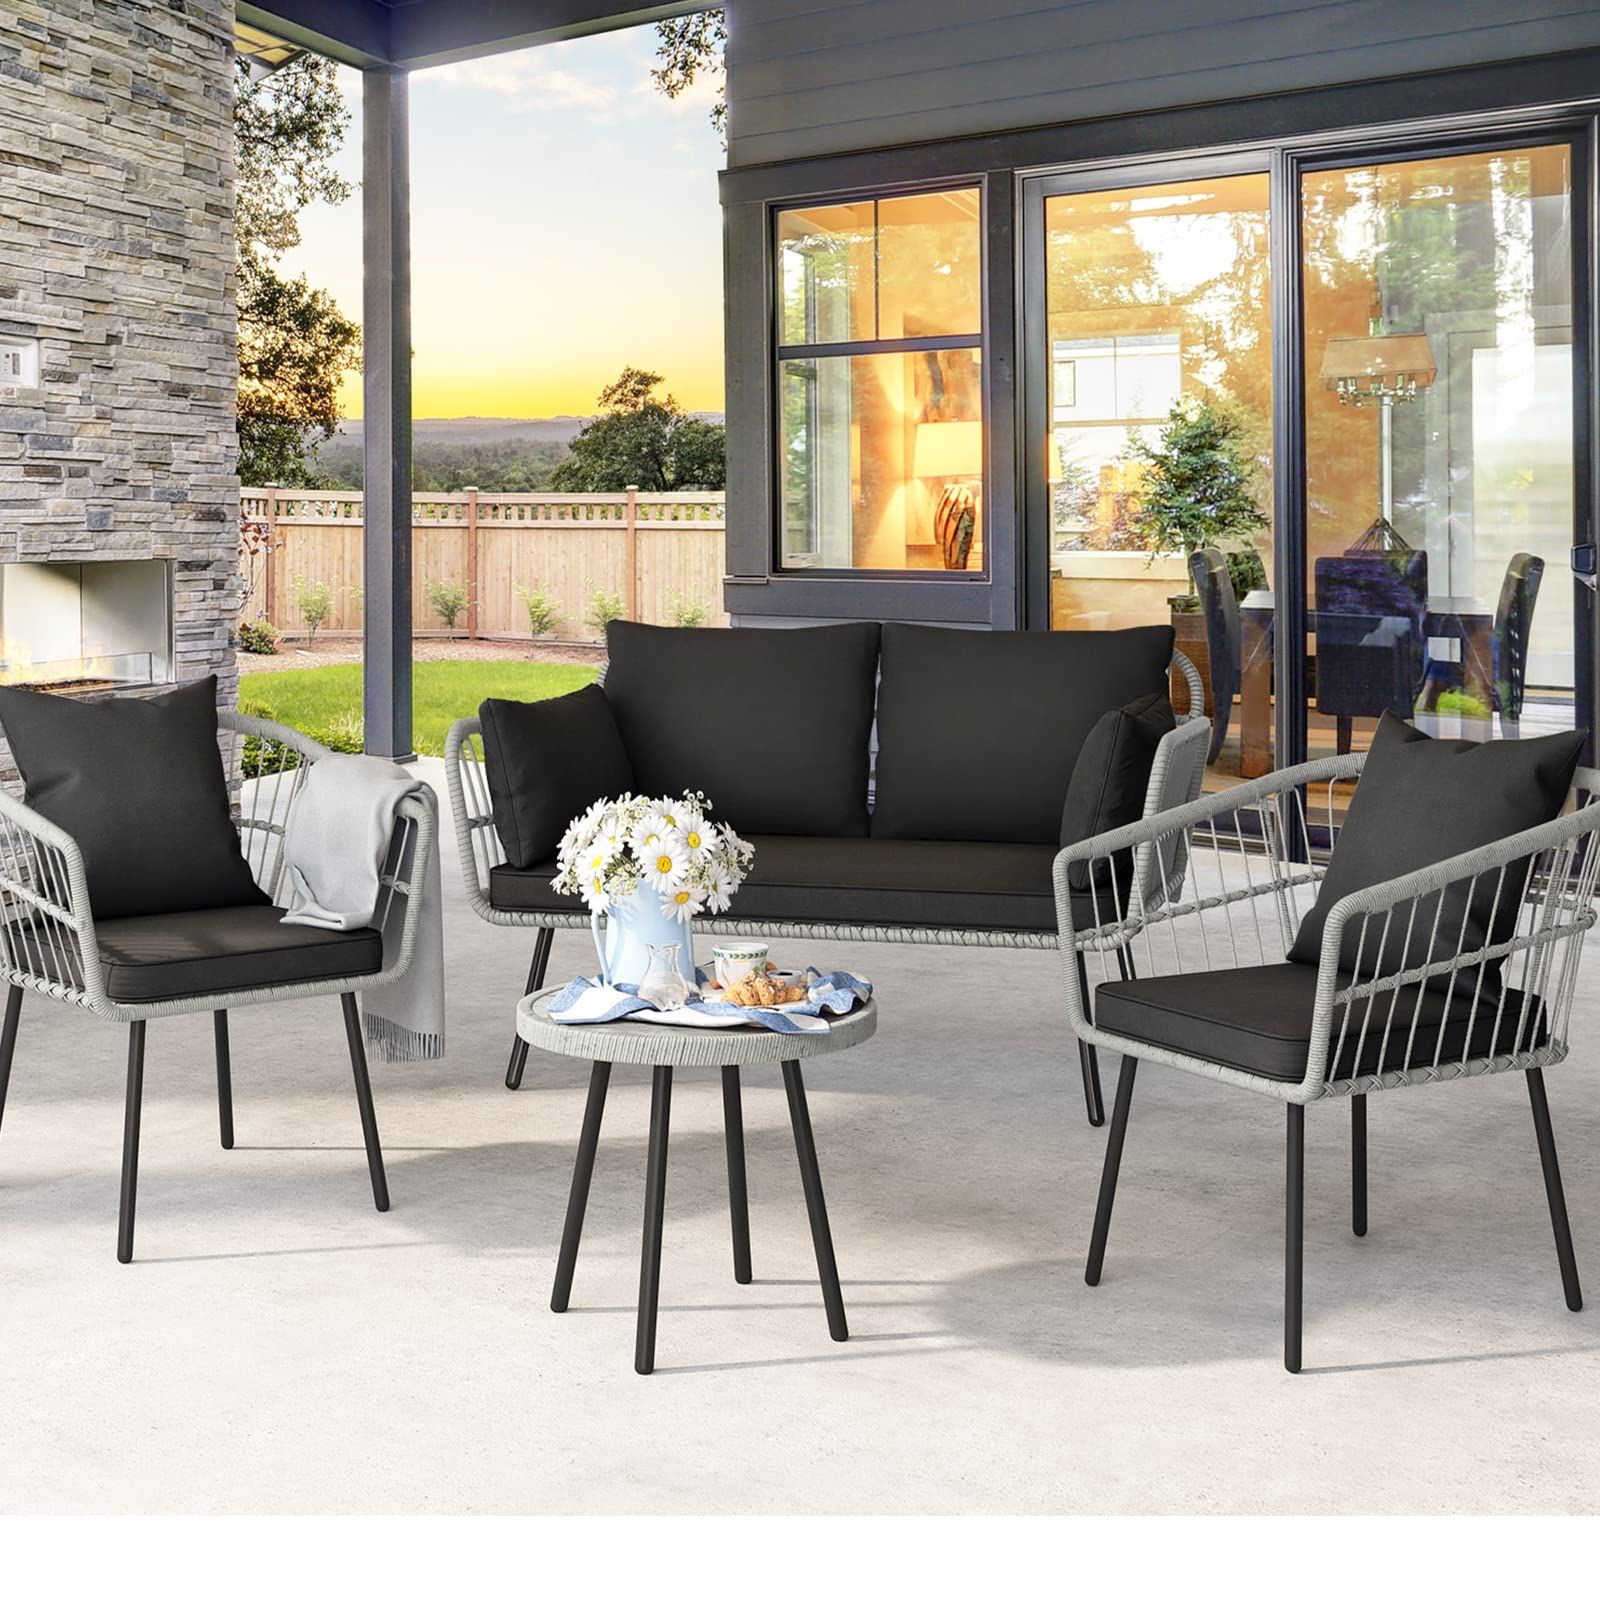 Amazon: Yitahome 4 Pieces Patio Furniture Set, Wicker Balcony Bistro Set,  Outdoor All Weather Rattan Conversation Set With Loveseat Chairs Table Soft  Cushions For Backyard, Pool, Deck, Garden – Black : Patio, Lawn Intended For 2017 Patio Furniture Wicker Outdoor Bistro Set (Photo 2 of 15)